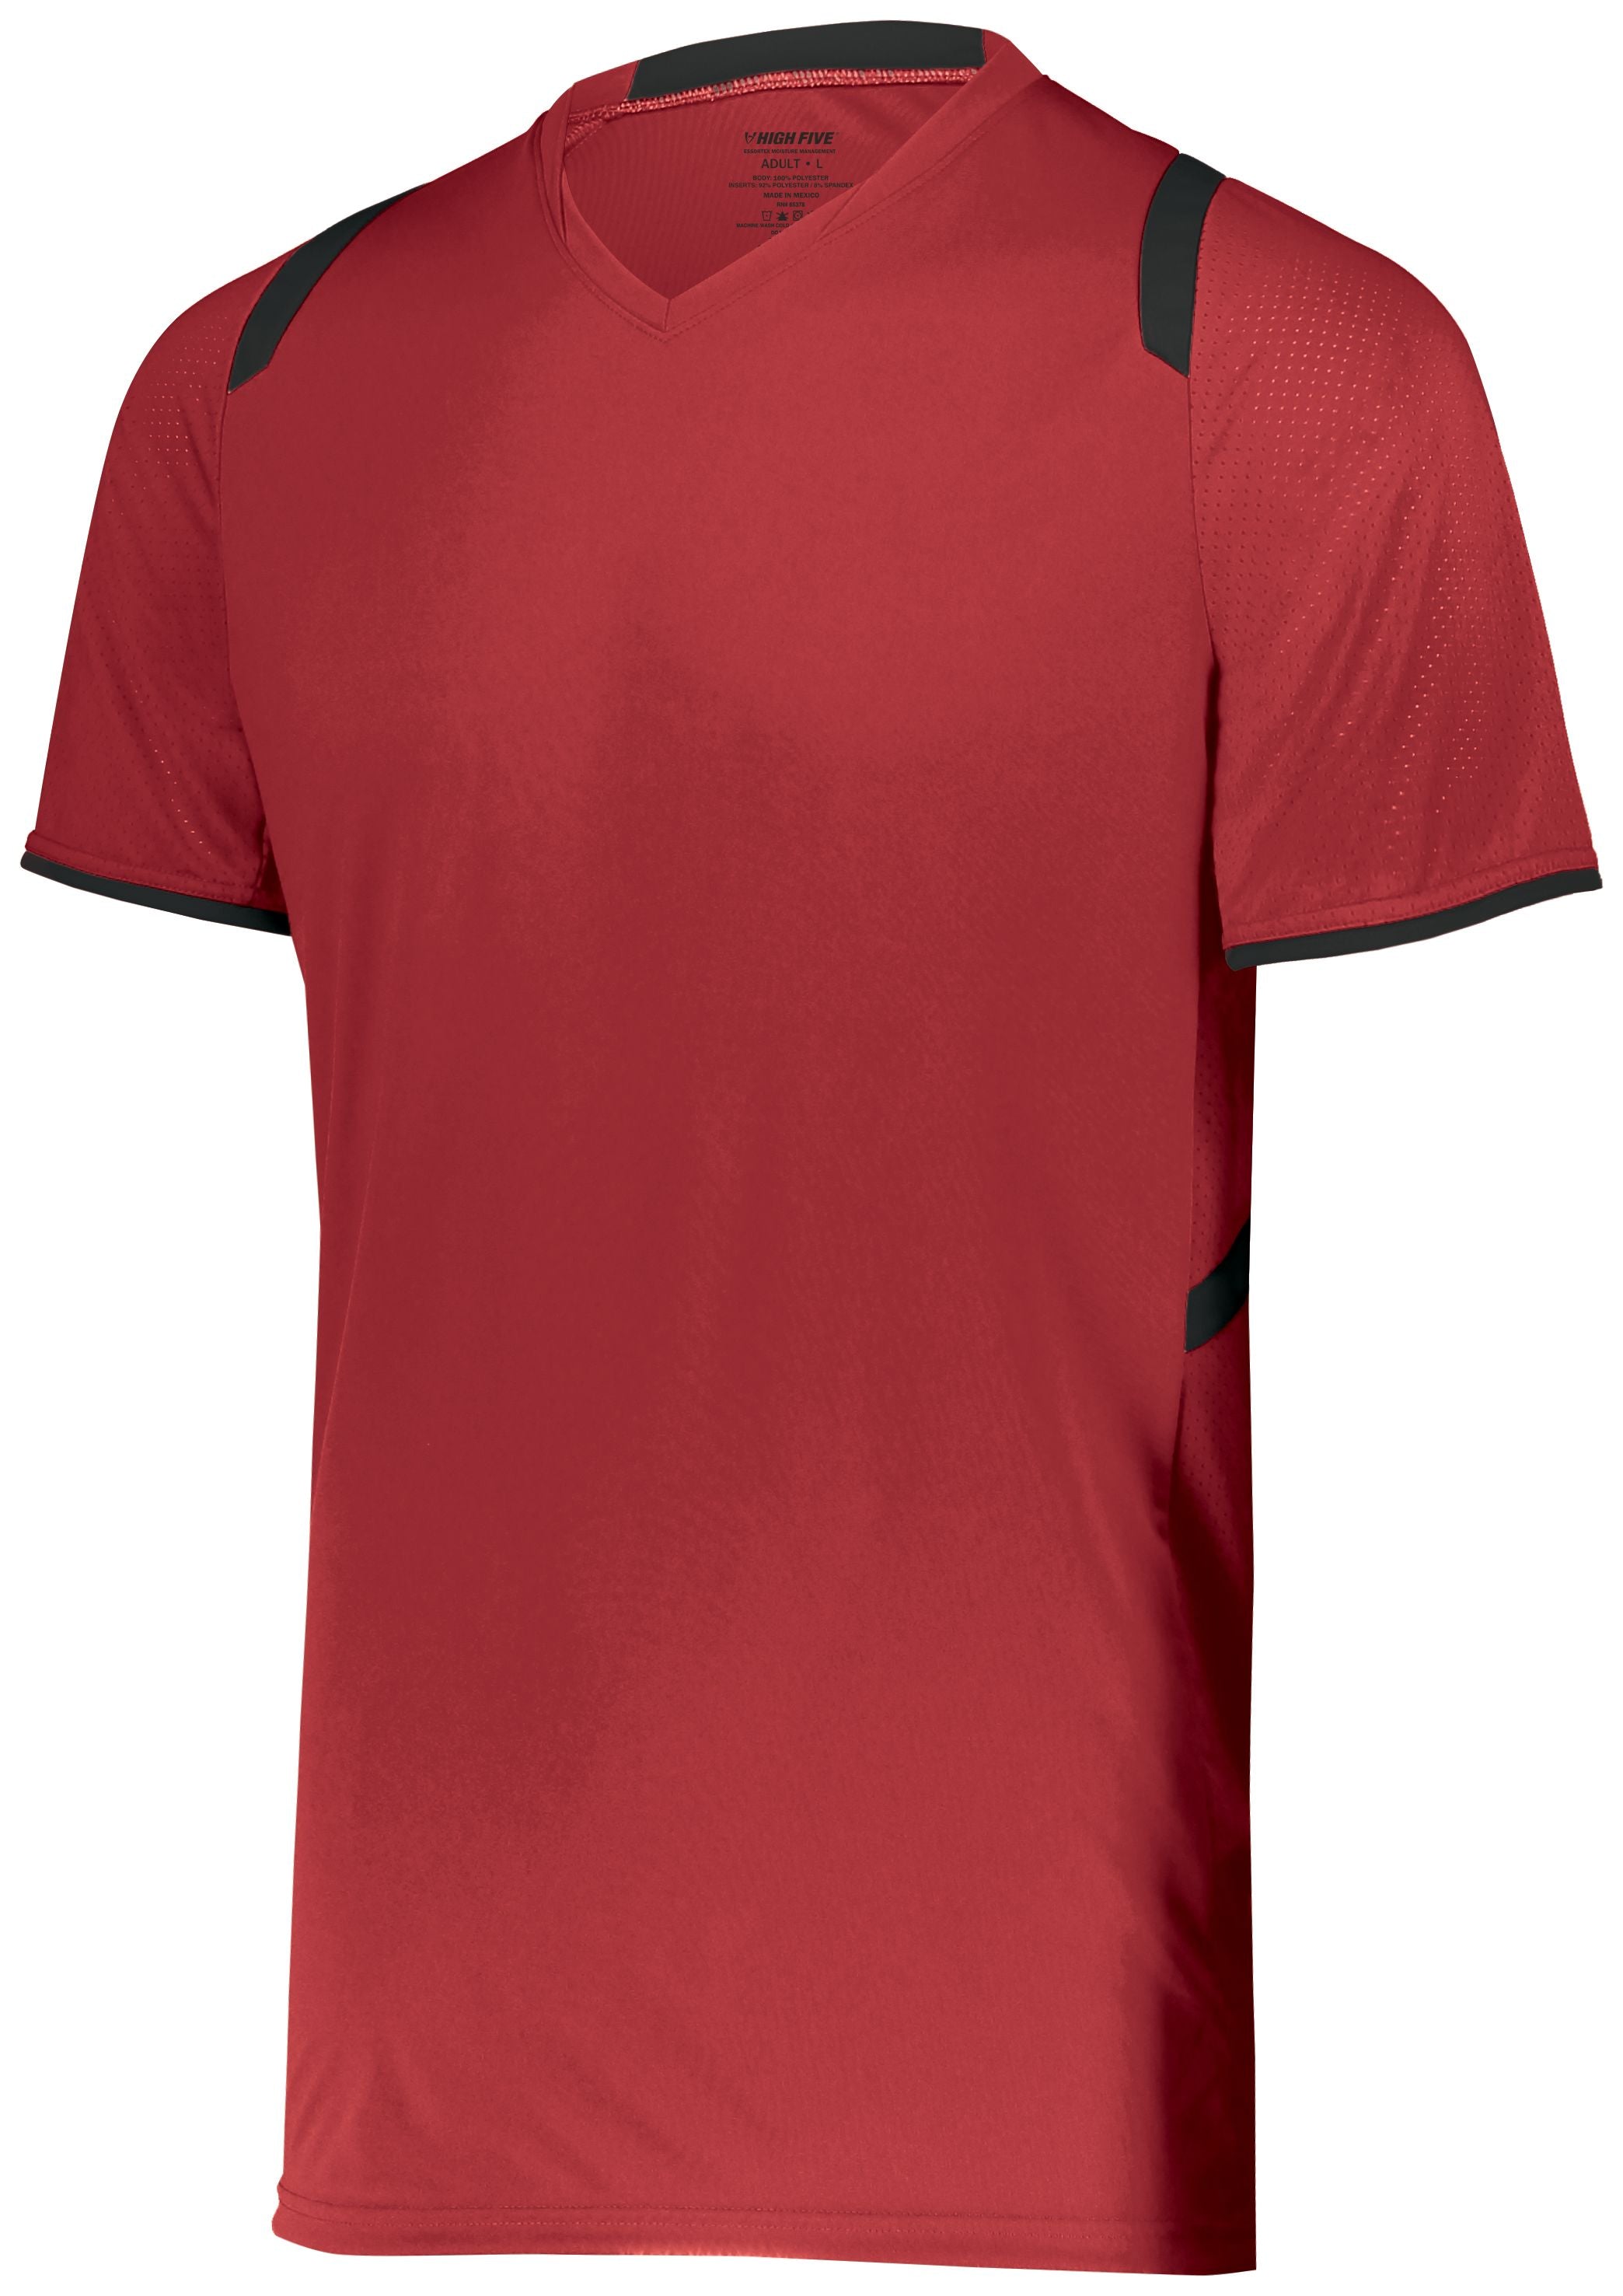 High 5 Youth Millennium Soccer Jersey in Scarlet/Black  -Part of the Youth, Youth-Jersey, High5-Products, Soccer, Shirts, All-Sports-1 product lines at KanaleyCreations.com